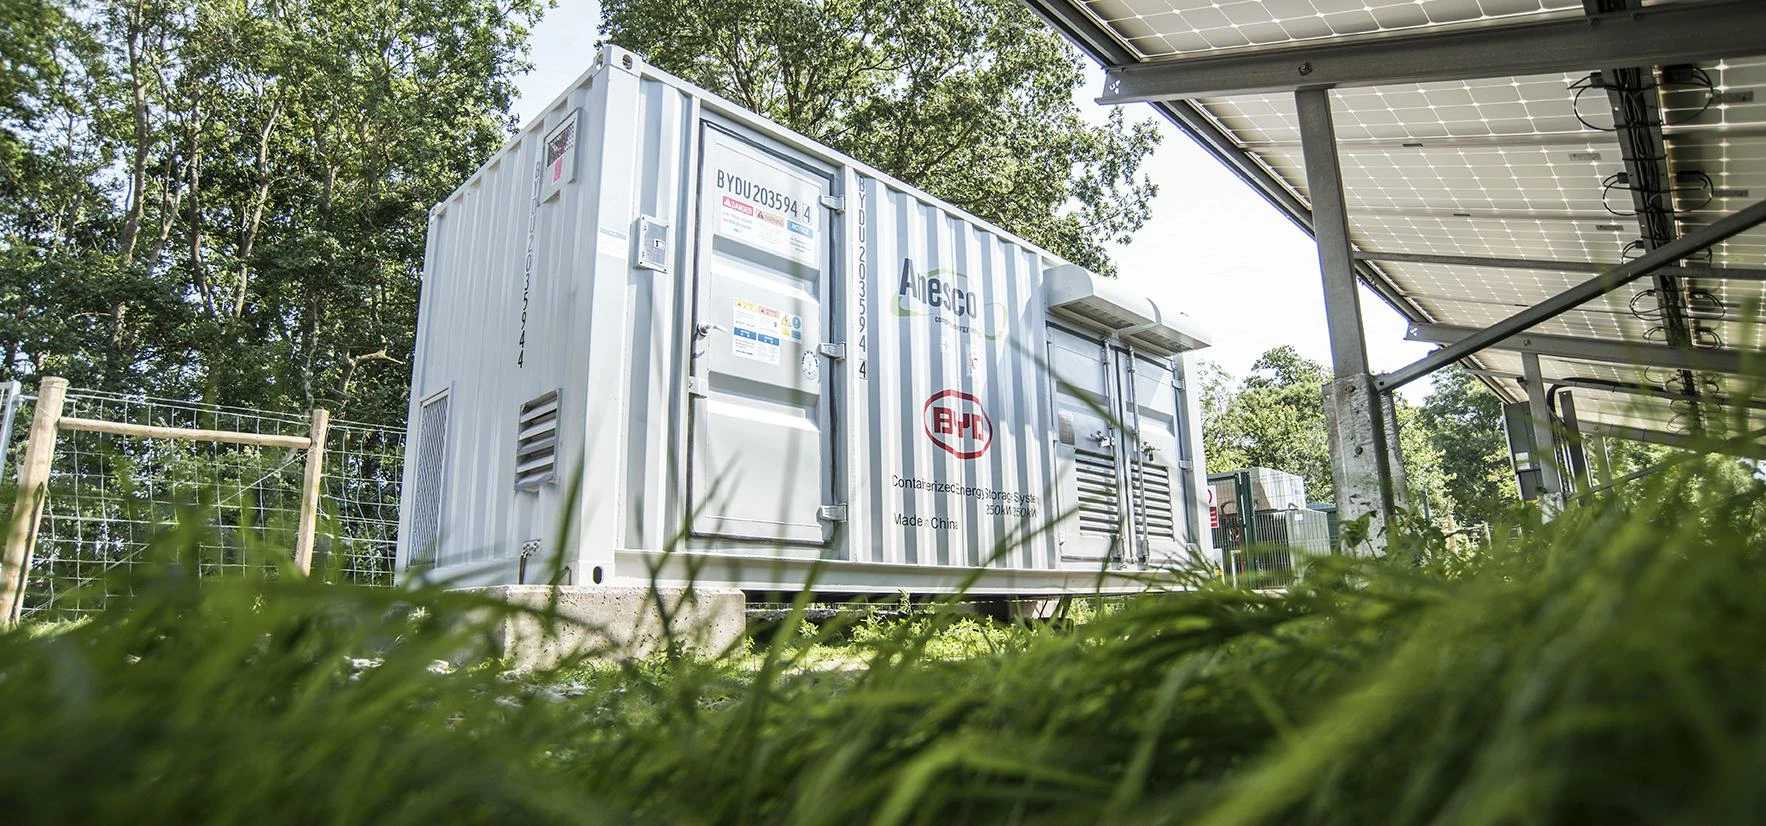 A battery storage unit installed by Anesco